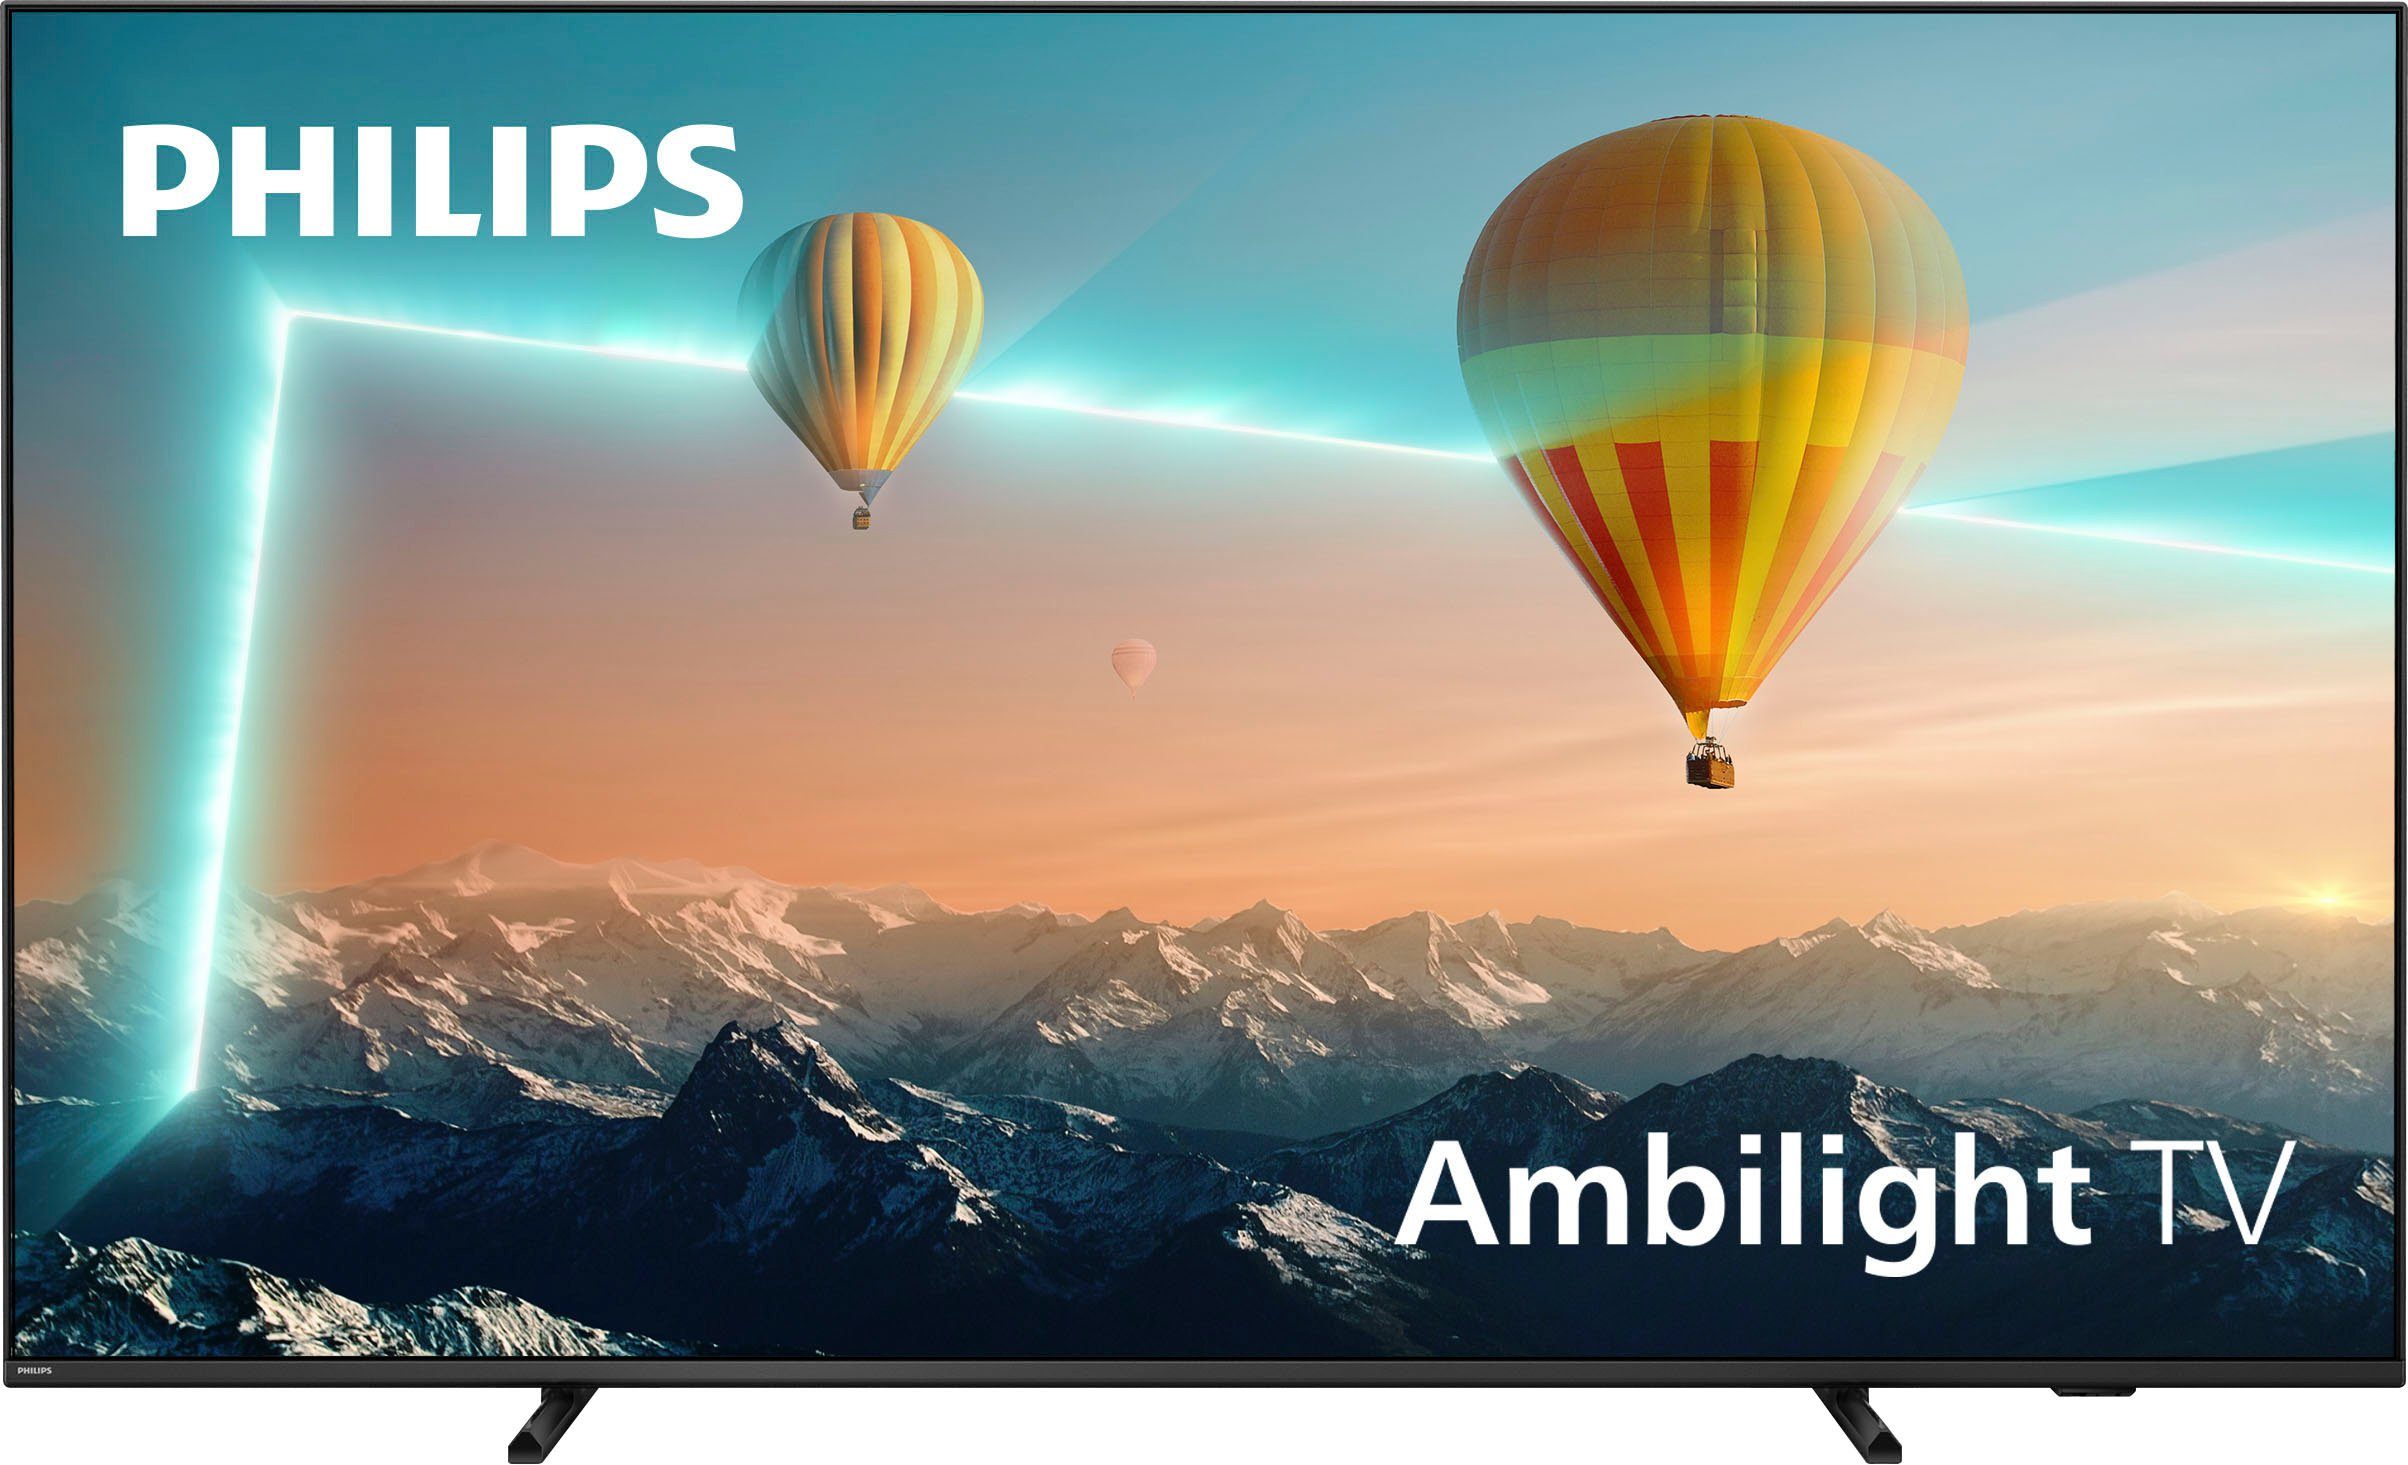 HD, LED-Fernseher Zoll, 4K Ultra 55PUS8007/12 cm/55 TV, Smart-TV) (139 Philips Android